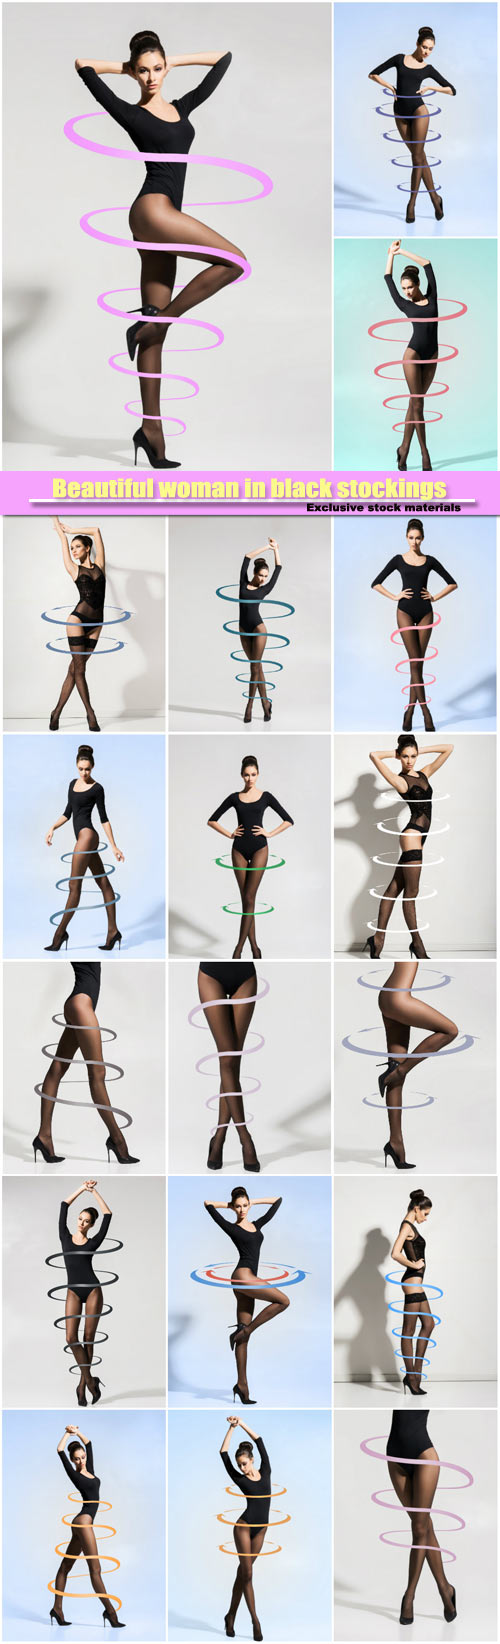 Beautiful woman in black stockings with arrows, fitness, sport and diet concept